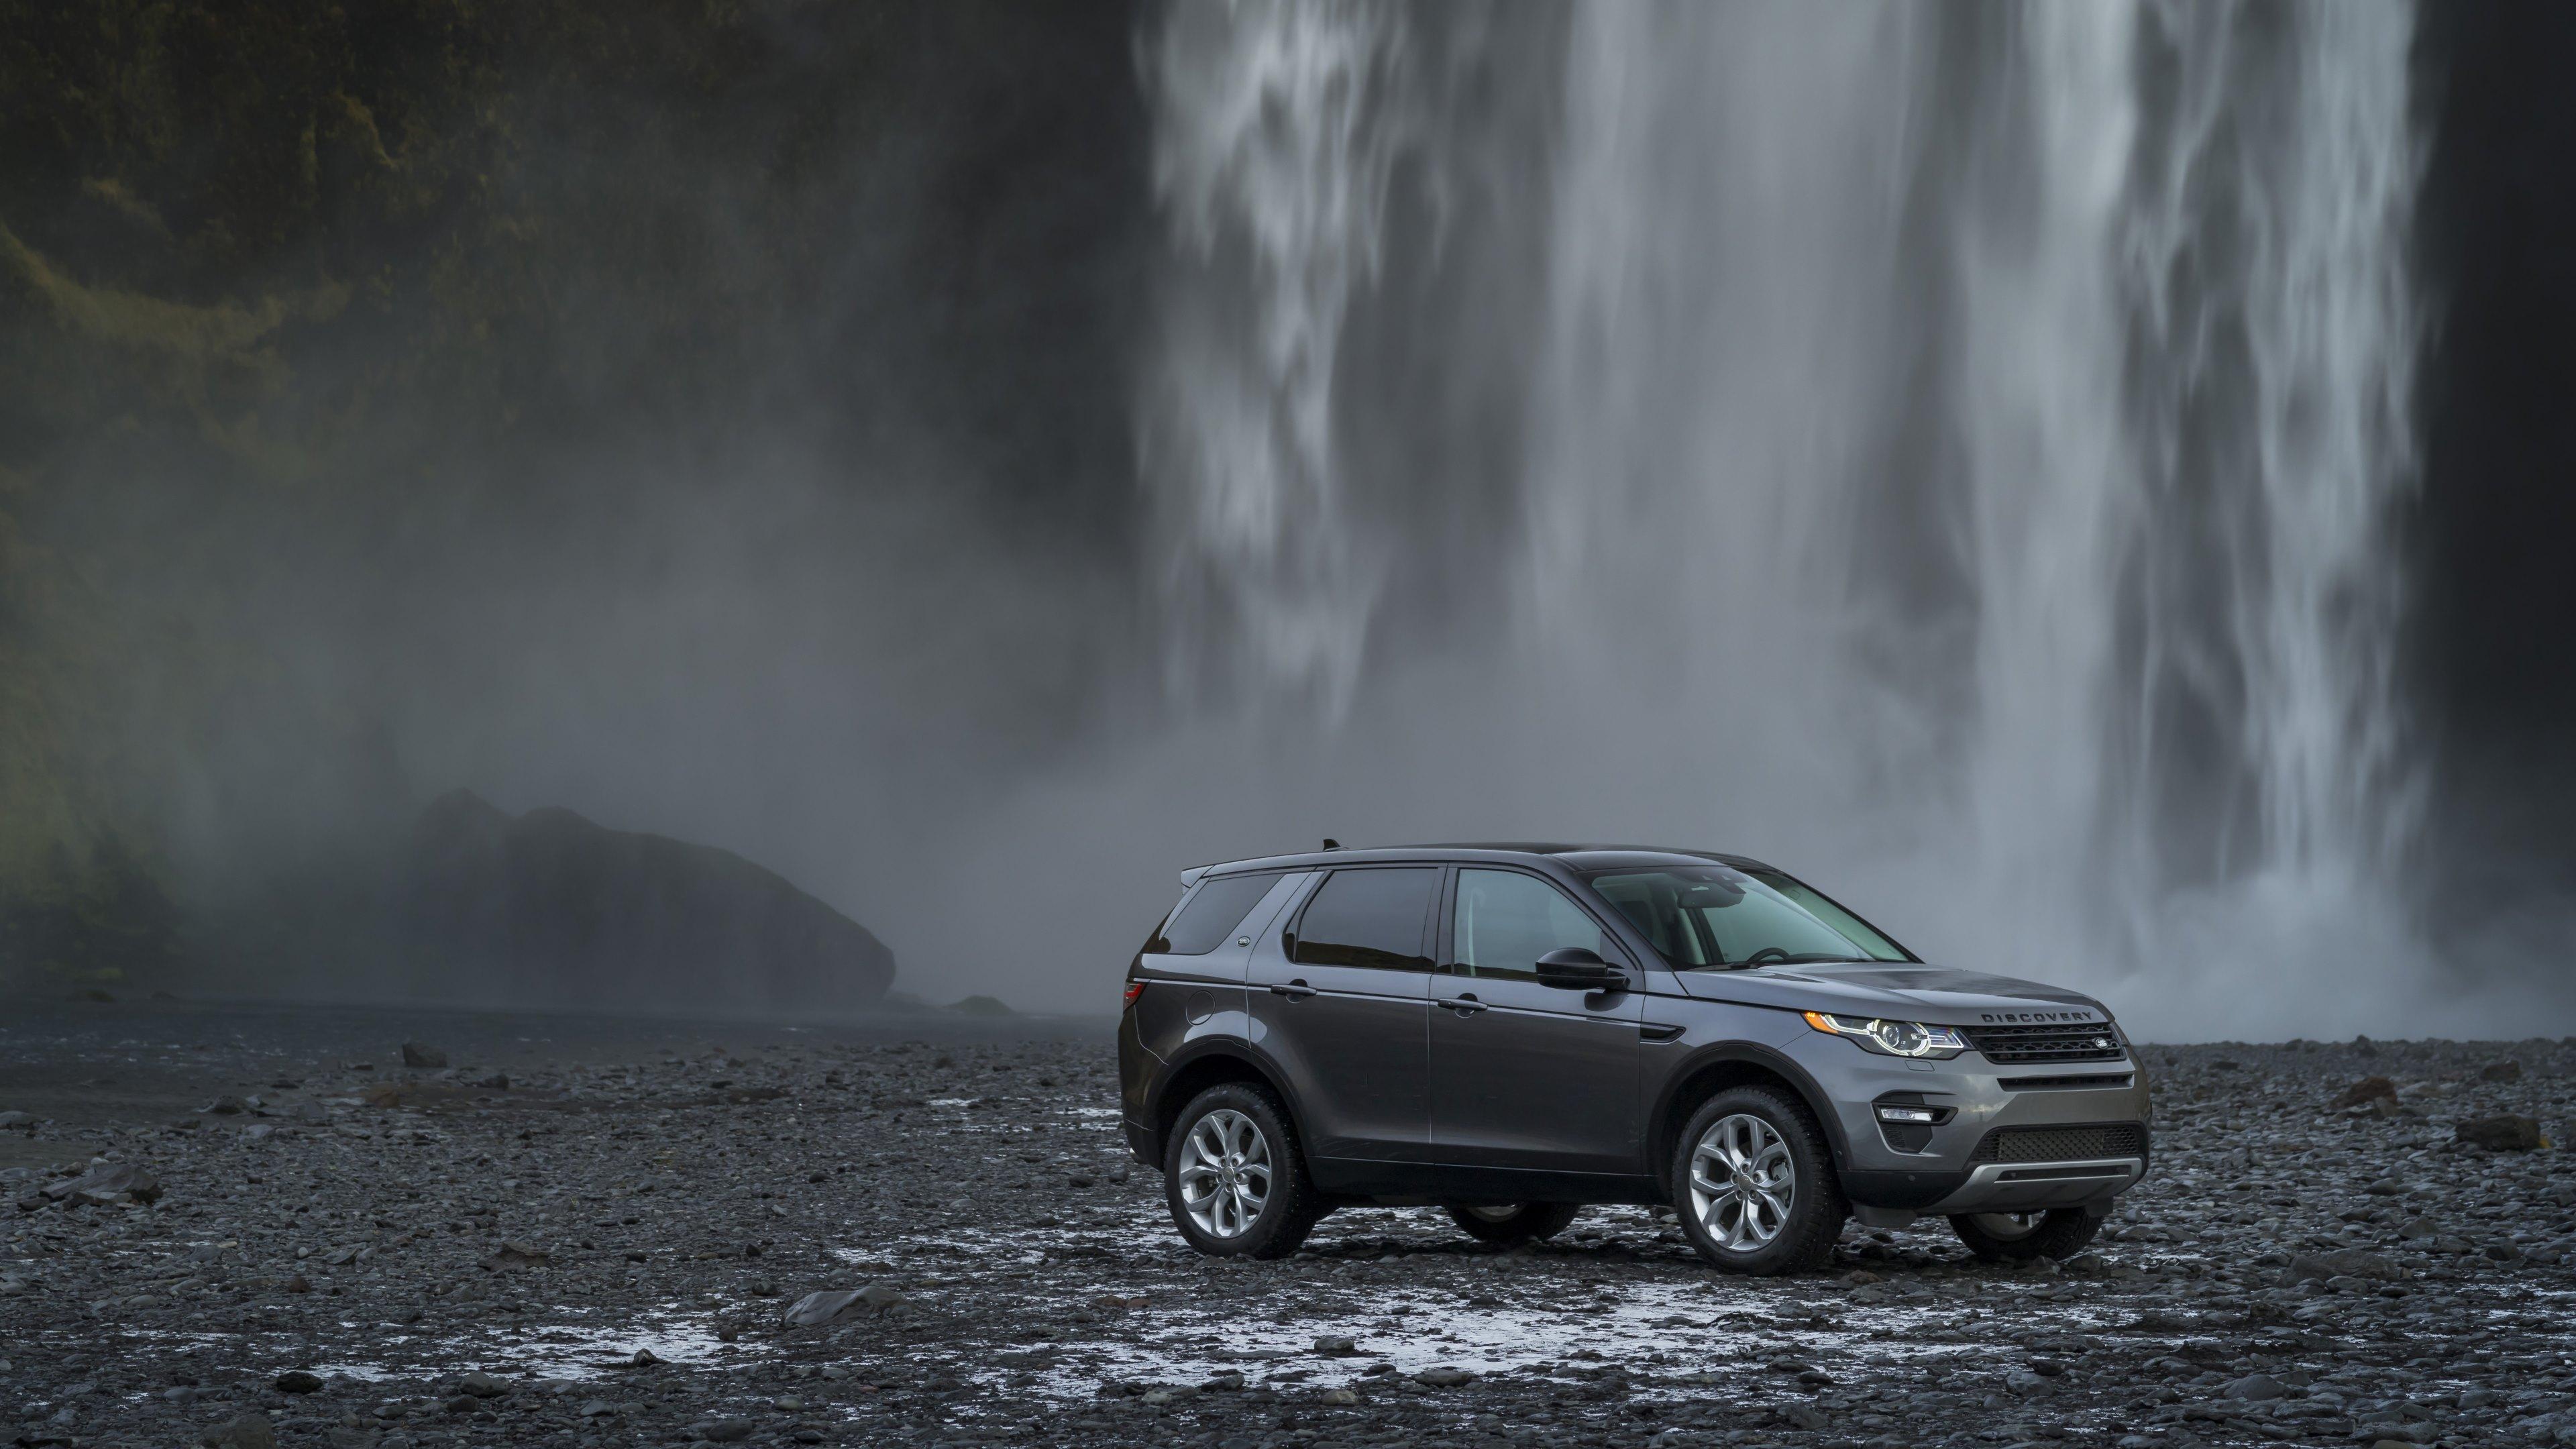 Land Rover Discovery Sport Wallpapers - Wallpaper Cave
 2014 Land Rover Discovery Wallpaper